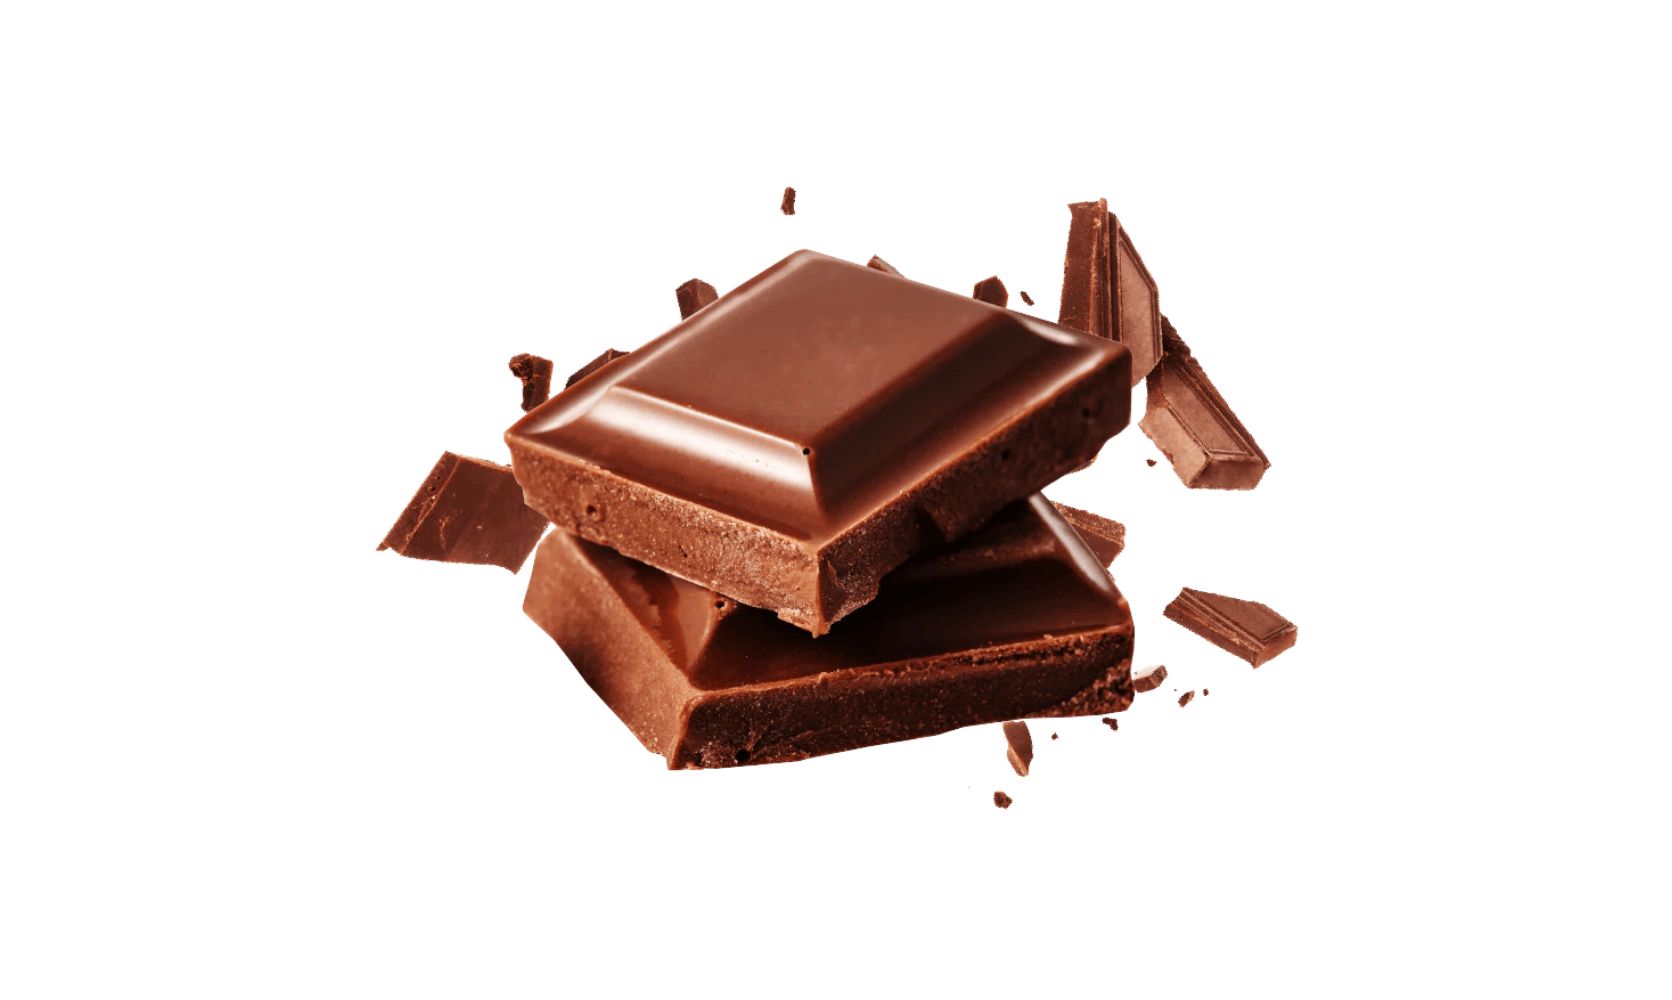 In this expert guide, we'll explore everything you need to know about chocolate bar edibles, from what edibles are to their amazing medical benefits. 